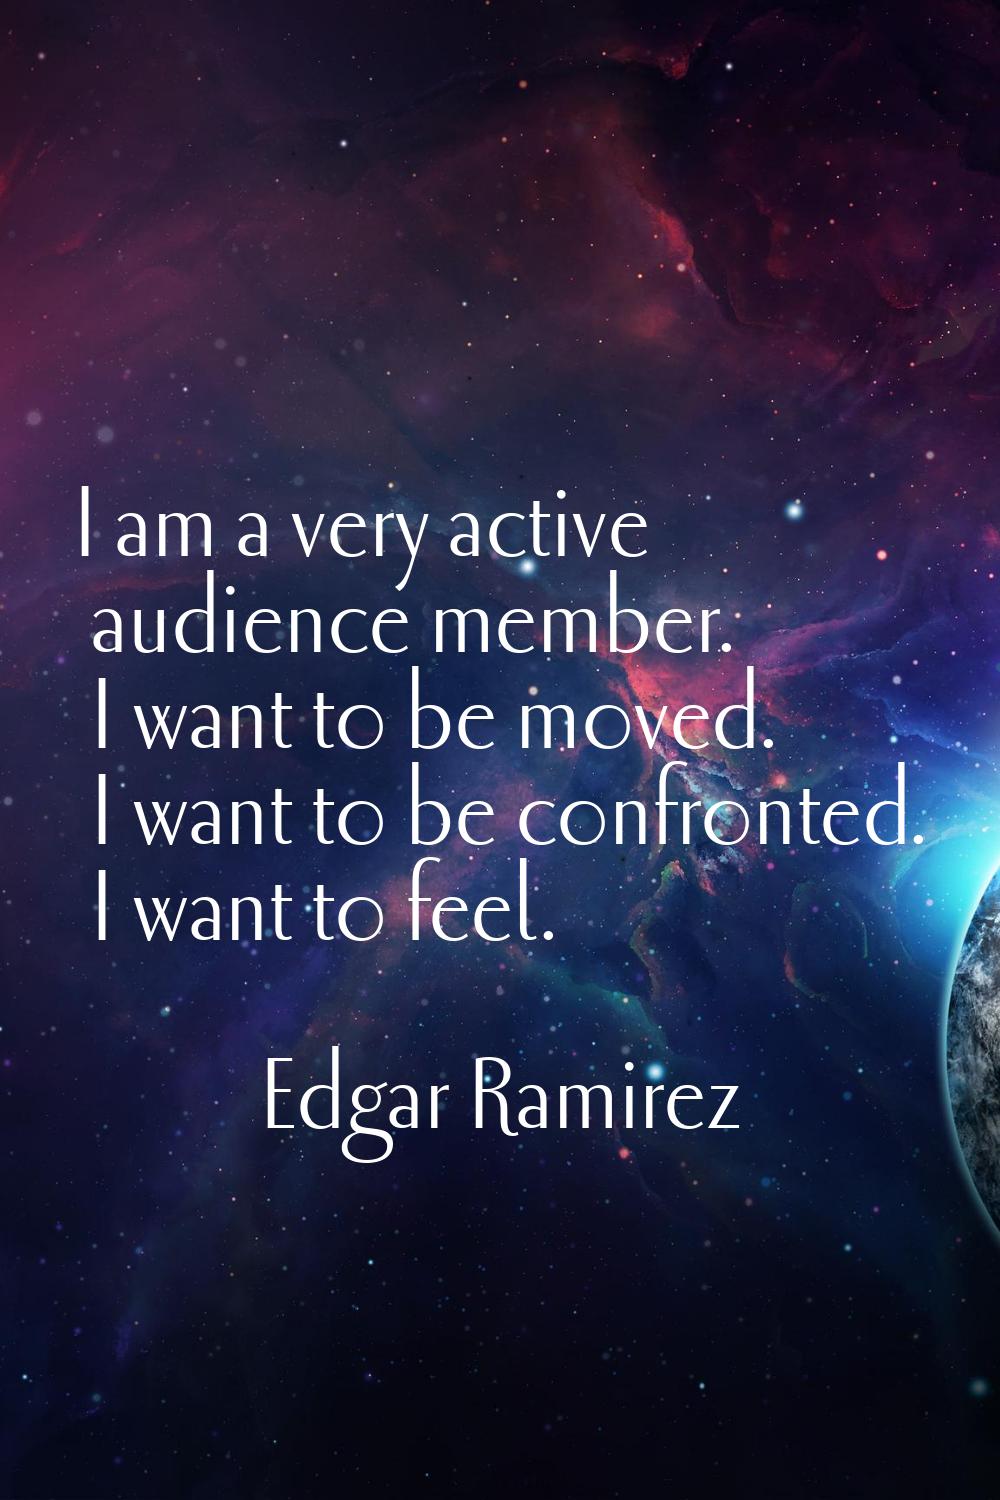 I am a very active audience member. I want to be moved. I want to be confronted. I want to feel.